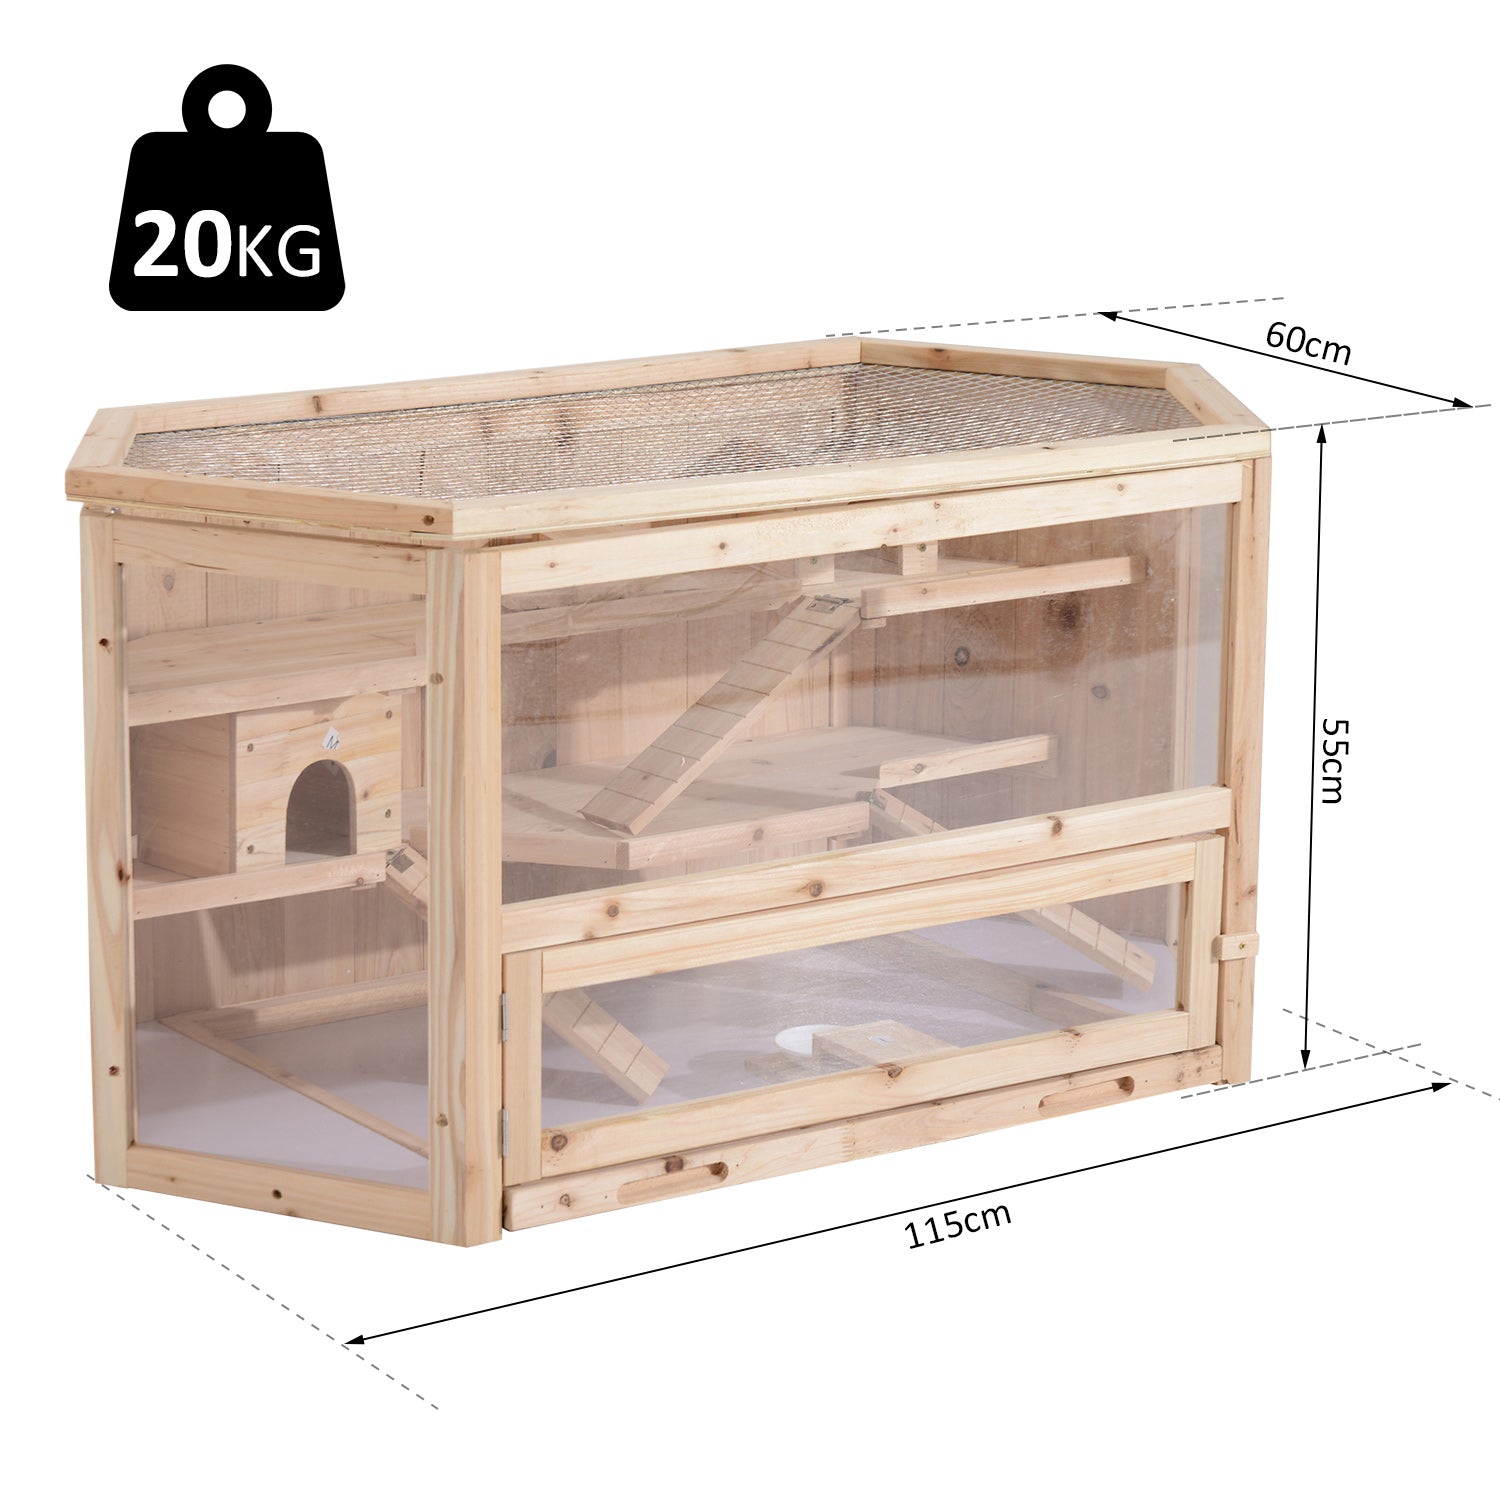 Wooden Hamster Cage Rodent Mouse Pet Small Animal hut Box, 115Lx60Wx58H cm